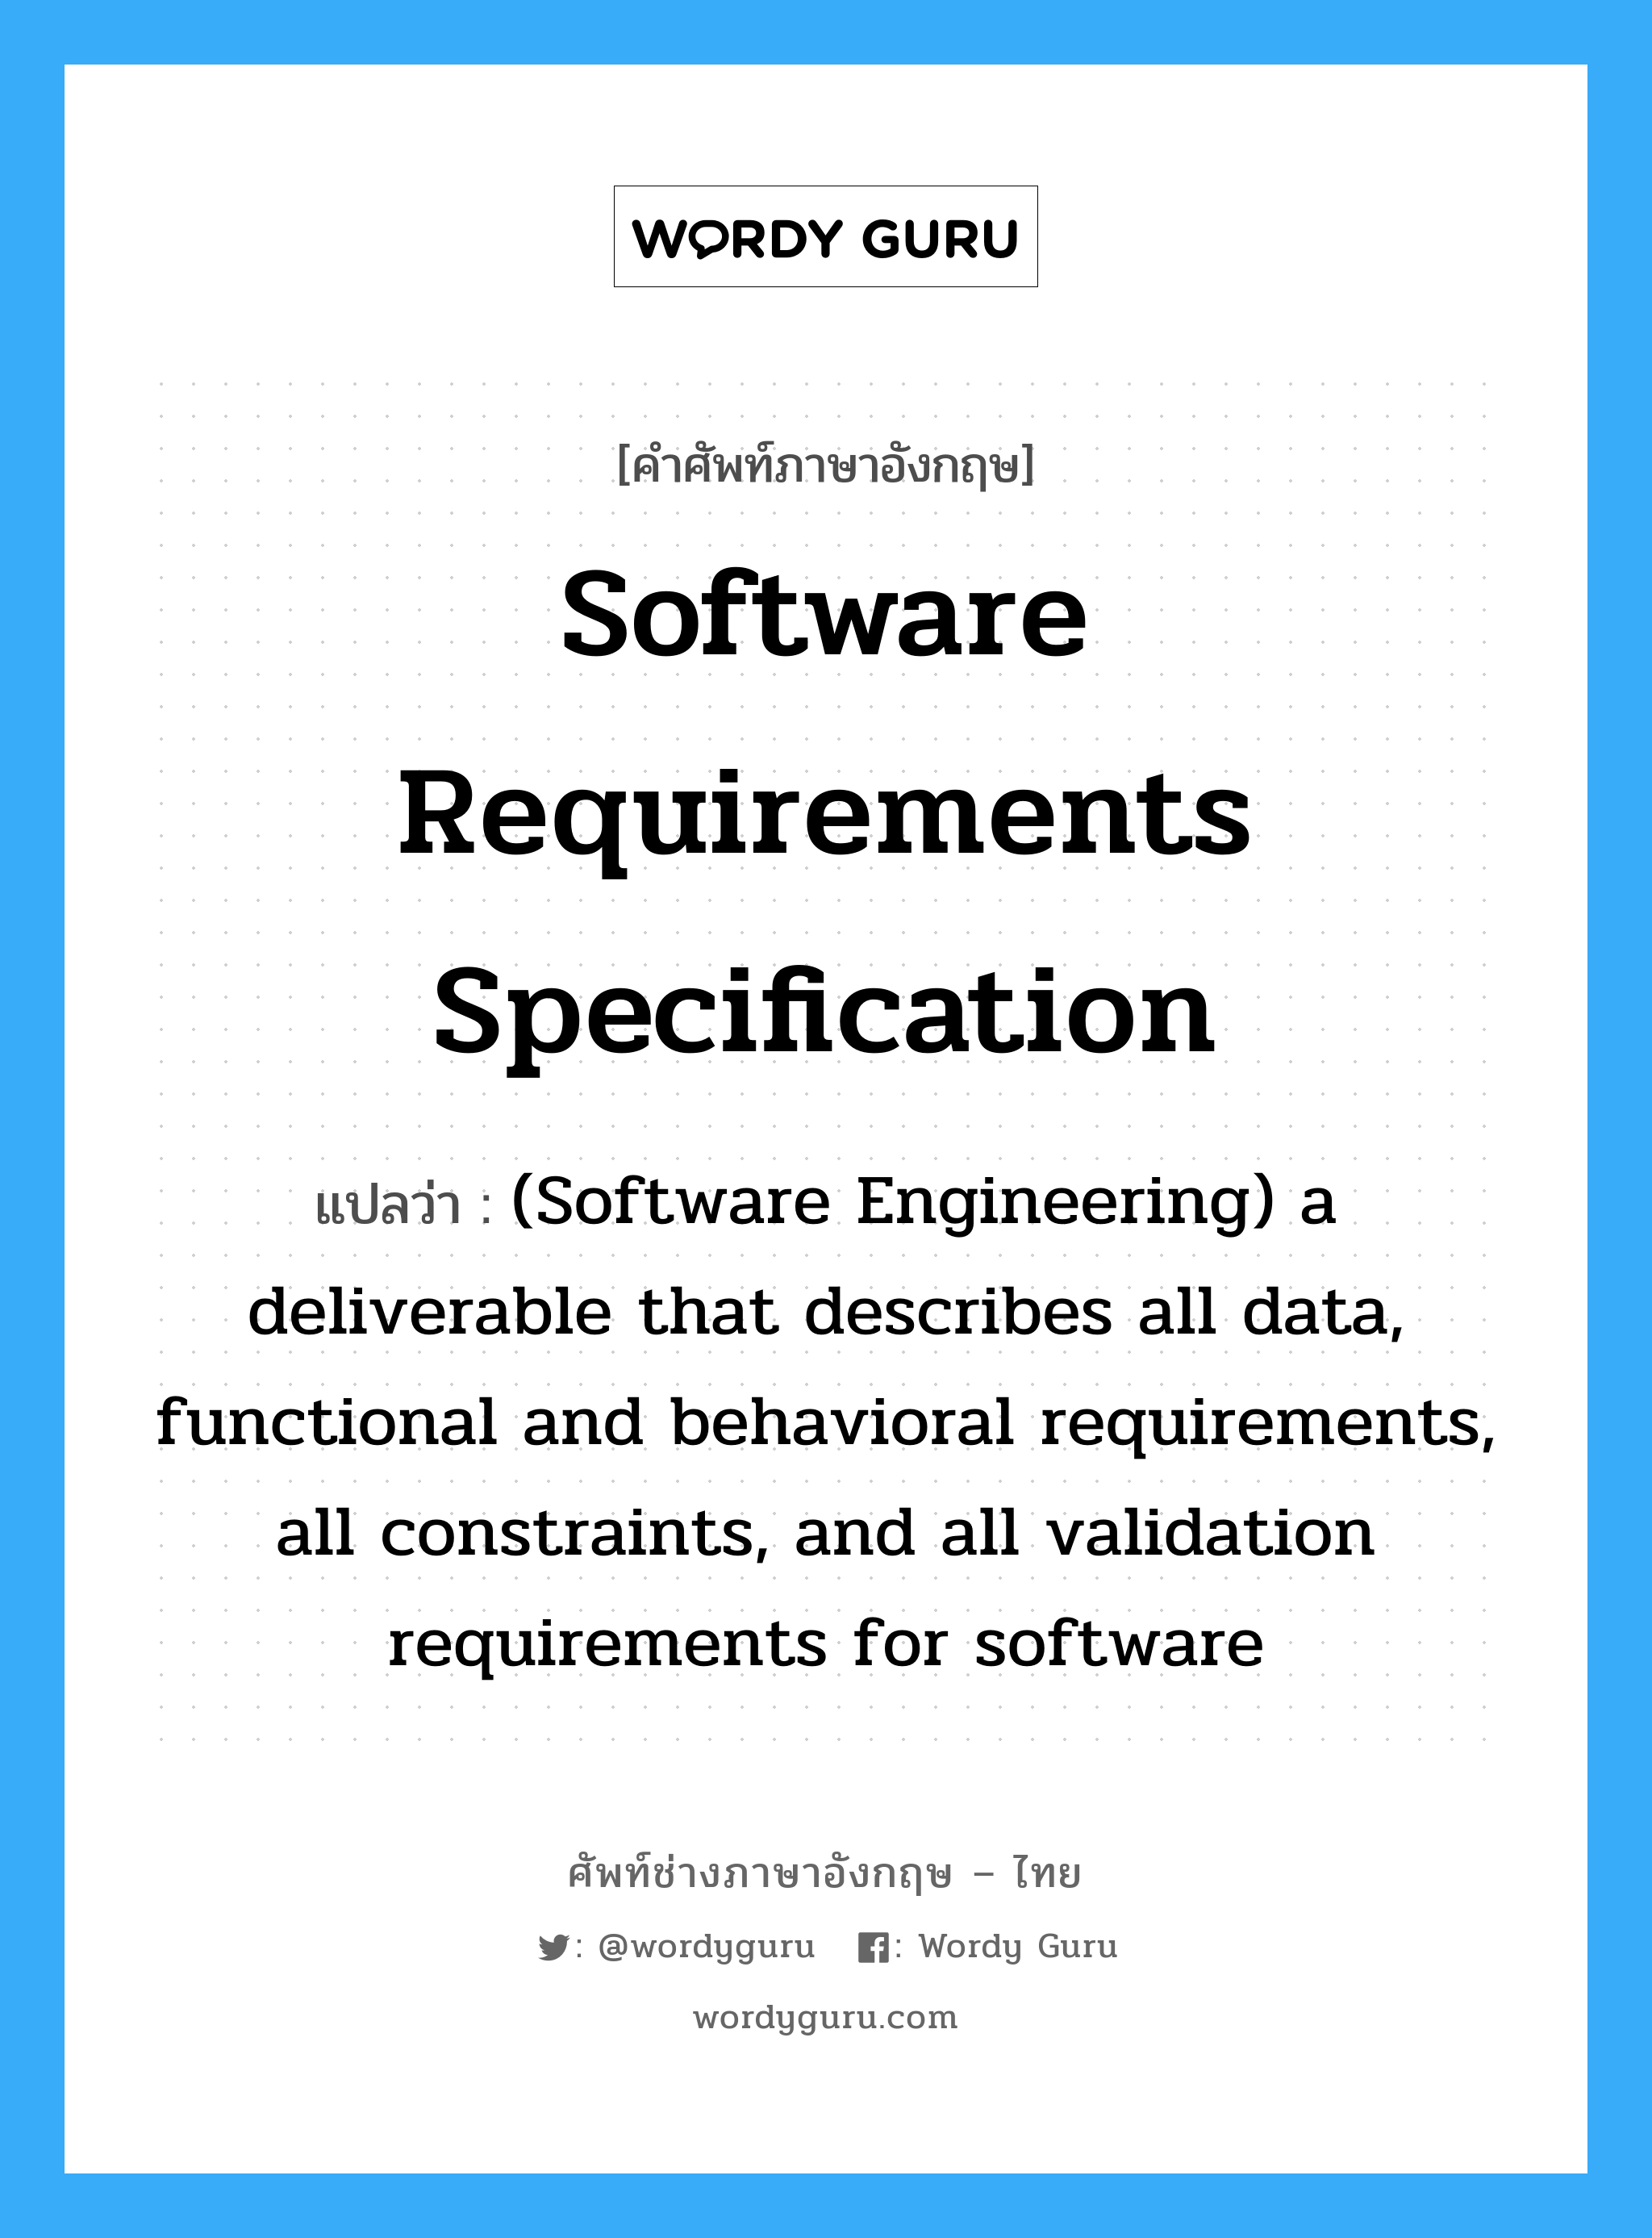 (Software Engineering) a deliverable that describes all data, functional and behavioral requirements, all constraints, and all validation requirements for software ภาษาอังกฤษ?, คำศัพท์ช่างภาษาอังกฤษ - ไทย (Software Engineering) a deliverable that describes all data, functional and behavioral requirements, all constraints, and all validation requirements for software คำศัพท์ภาษาอังกฤษ (Software Engineering) a deliverable that describes all data, functional and behavioral requirements, all constraints, and all validation requirements for software แปลว่า Software Requirements Specification